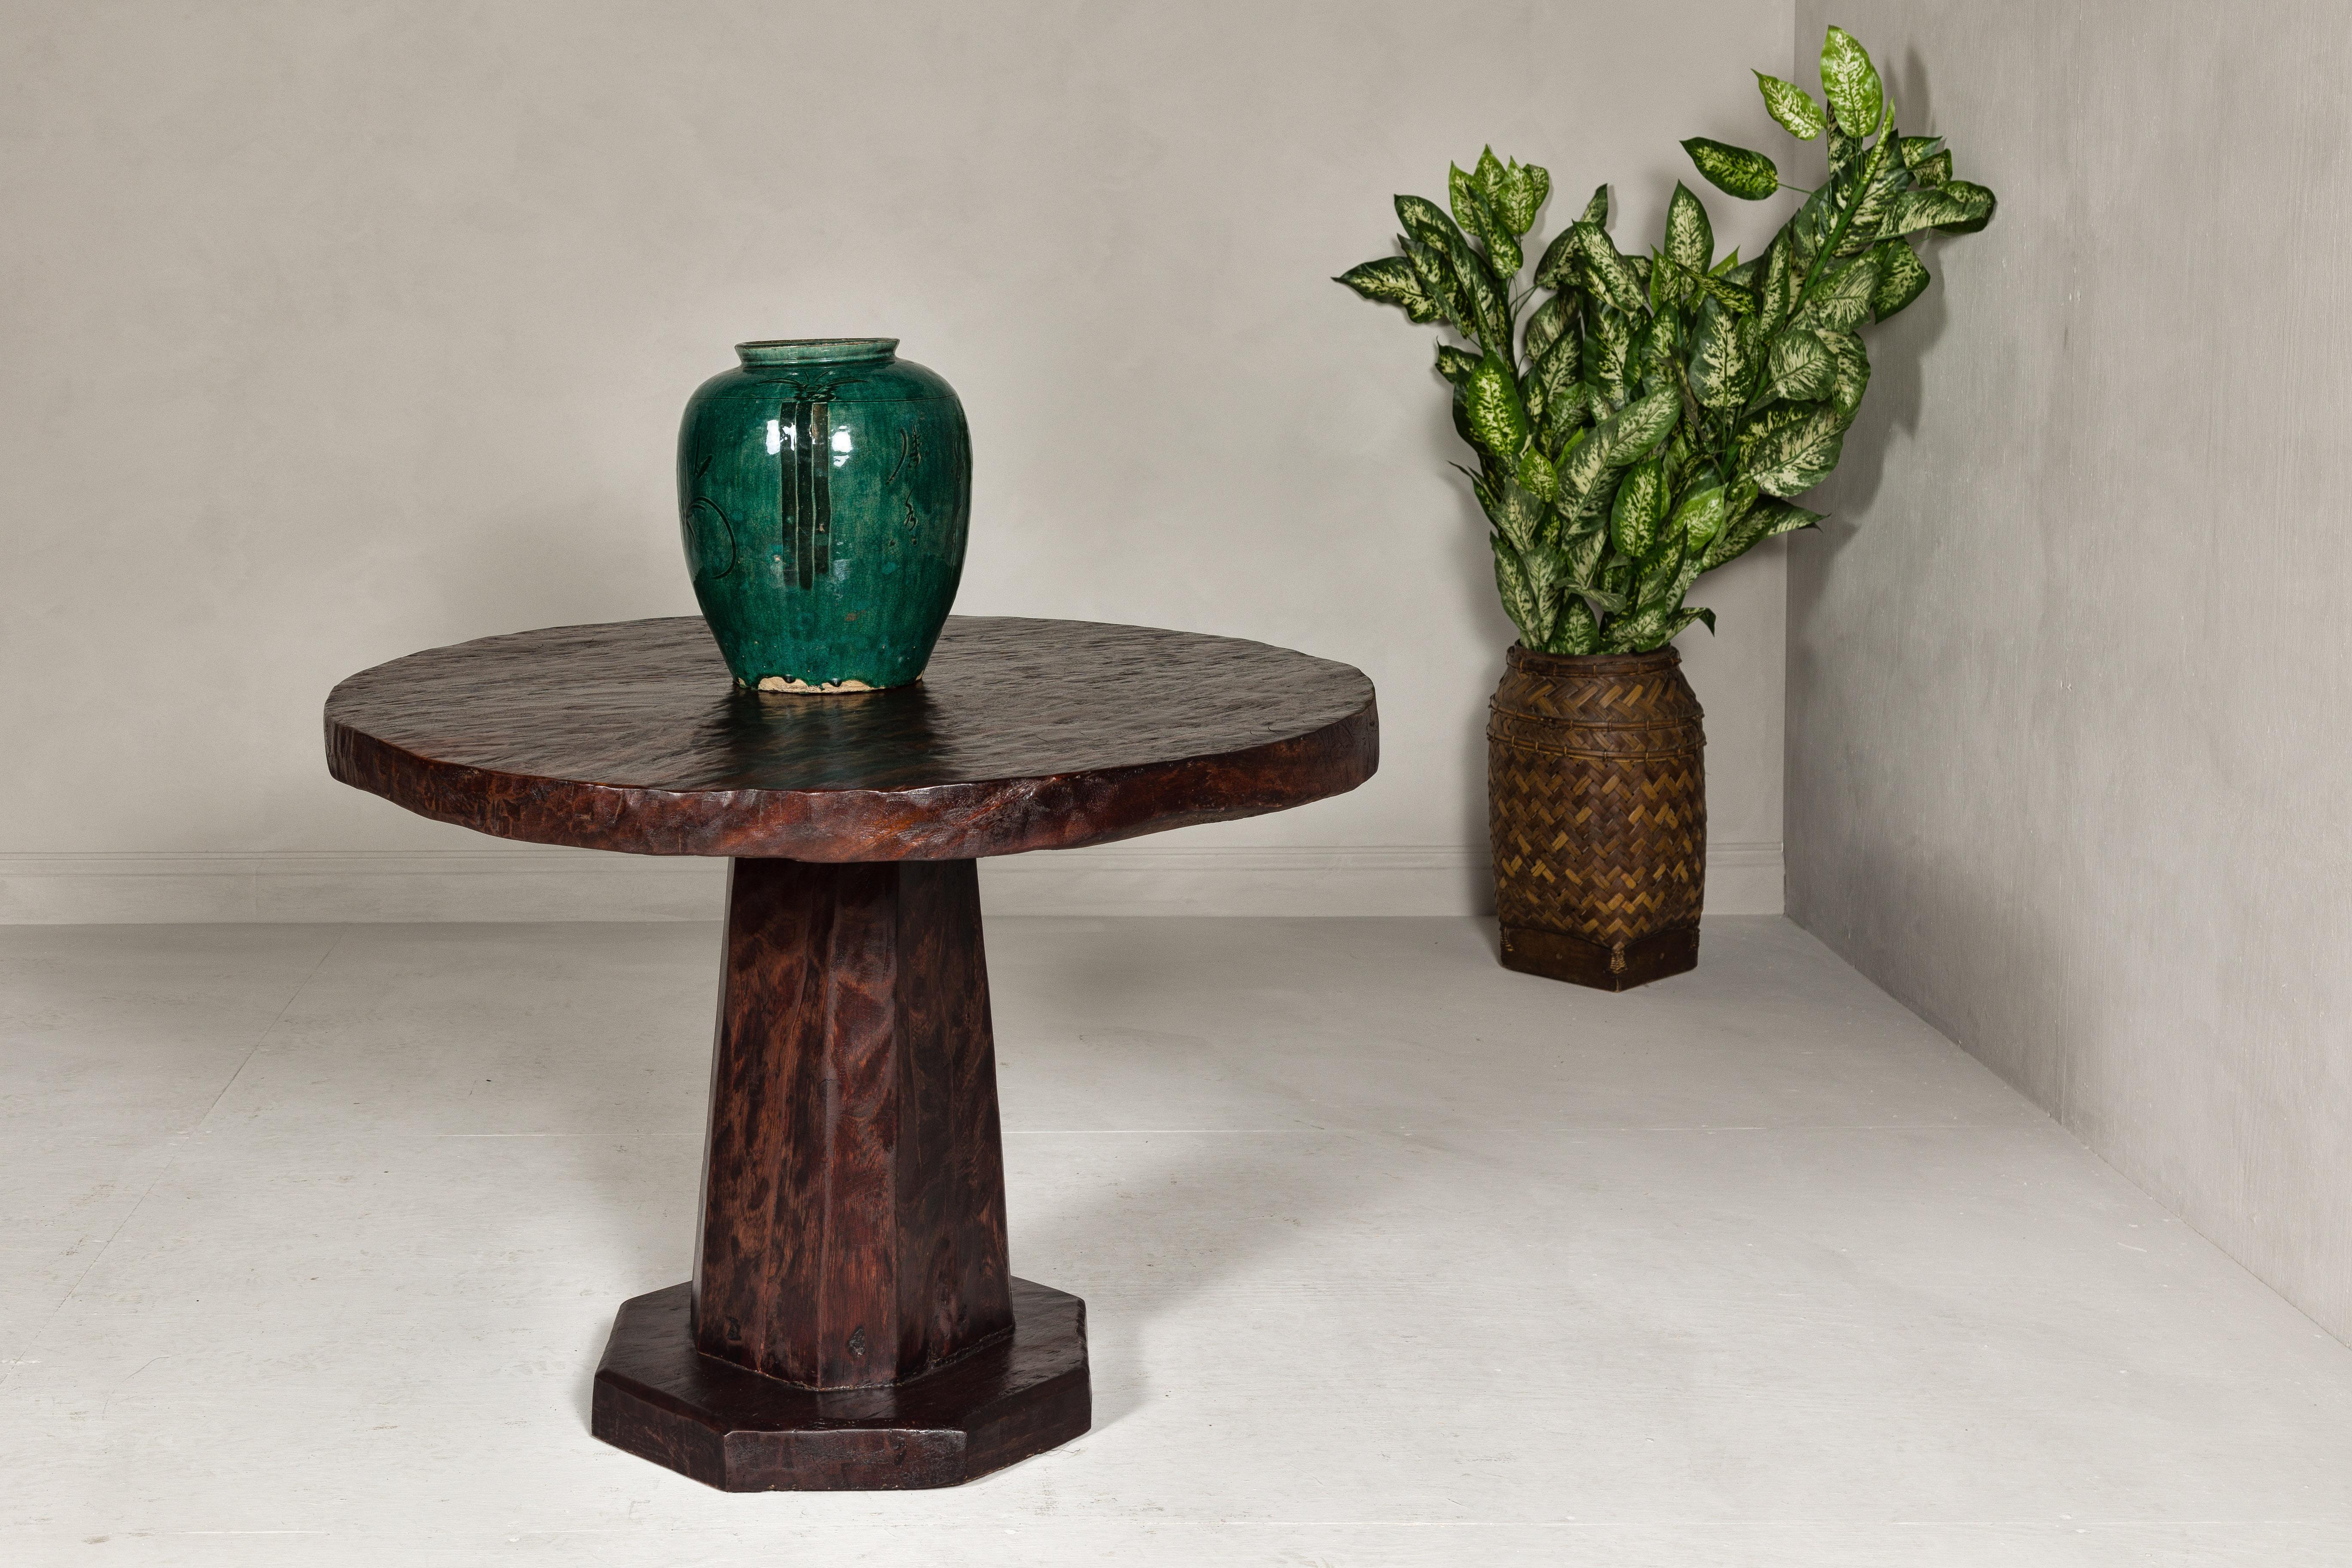 A teak wood center table with circular top, pedestal base and dark stain. This vintage teak wood center table, with its circular top and pedestal base, is a testament to classic design and skilled craftsmanship. The table has been professionally